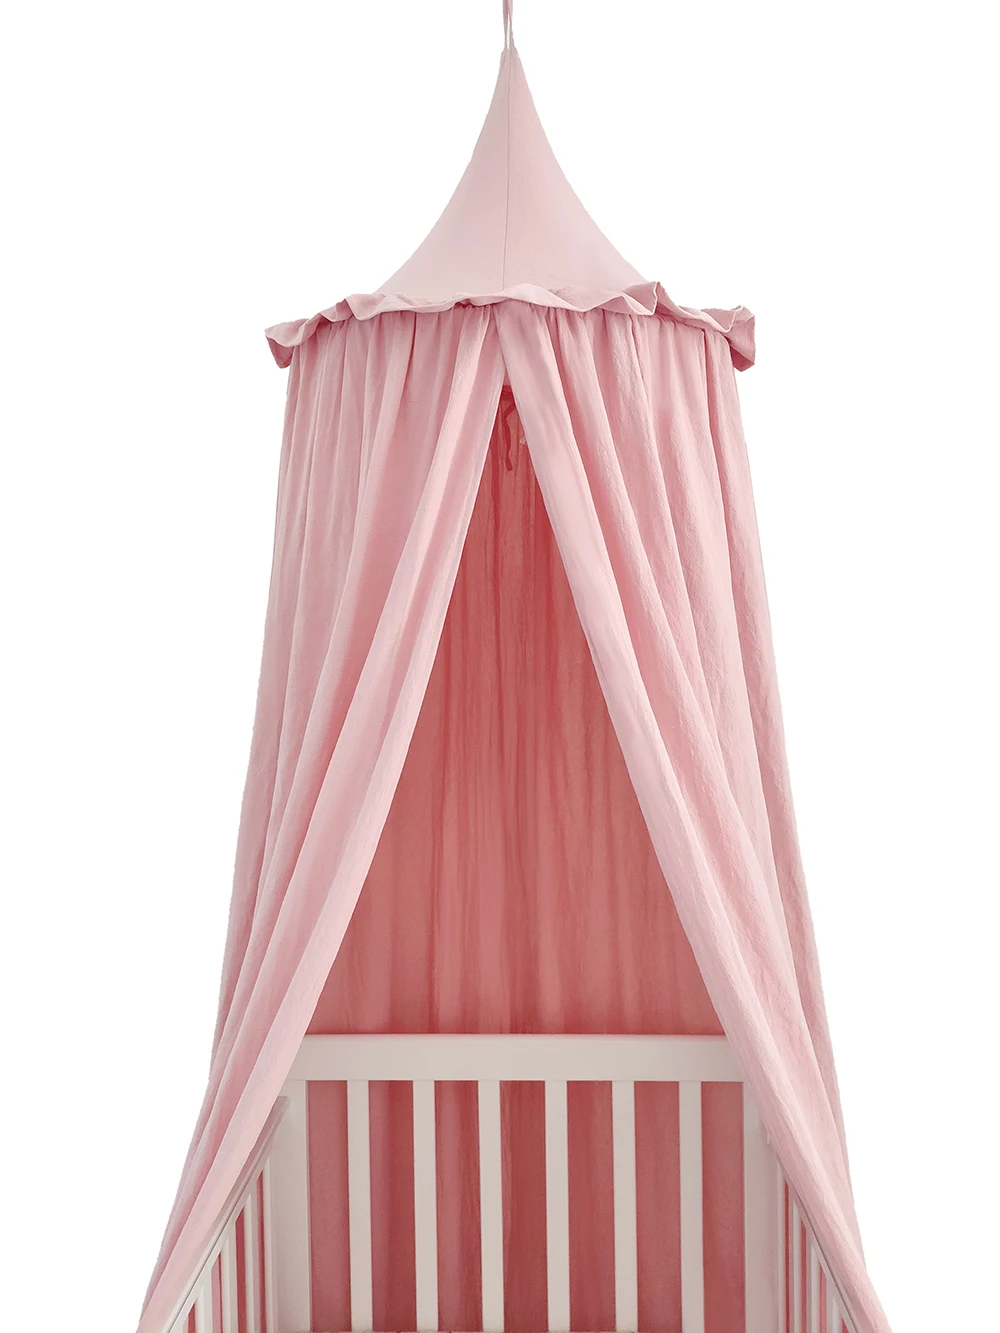 100%  Cotton Crib Kids Room Deco Baldachin with Frill Bed Curtain Canopy for Nursery aa cotton kid baby bed canopy bedcover mosquito net curtain bedding round dome tent fly insect protection home deco